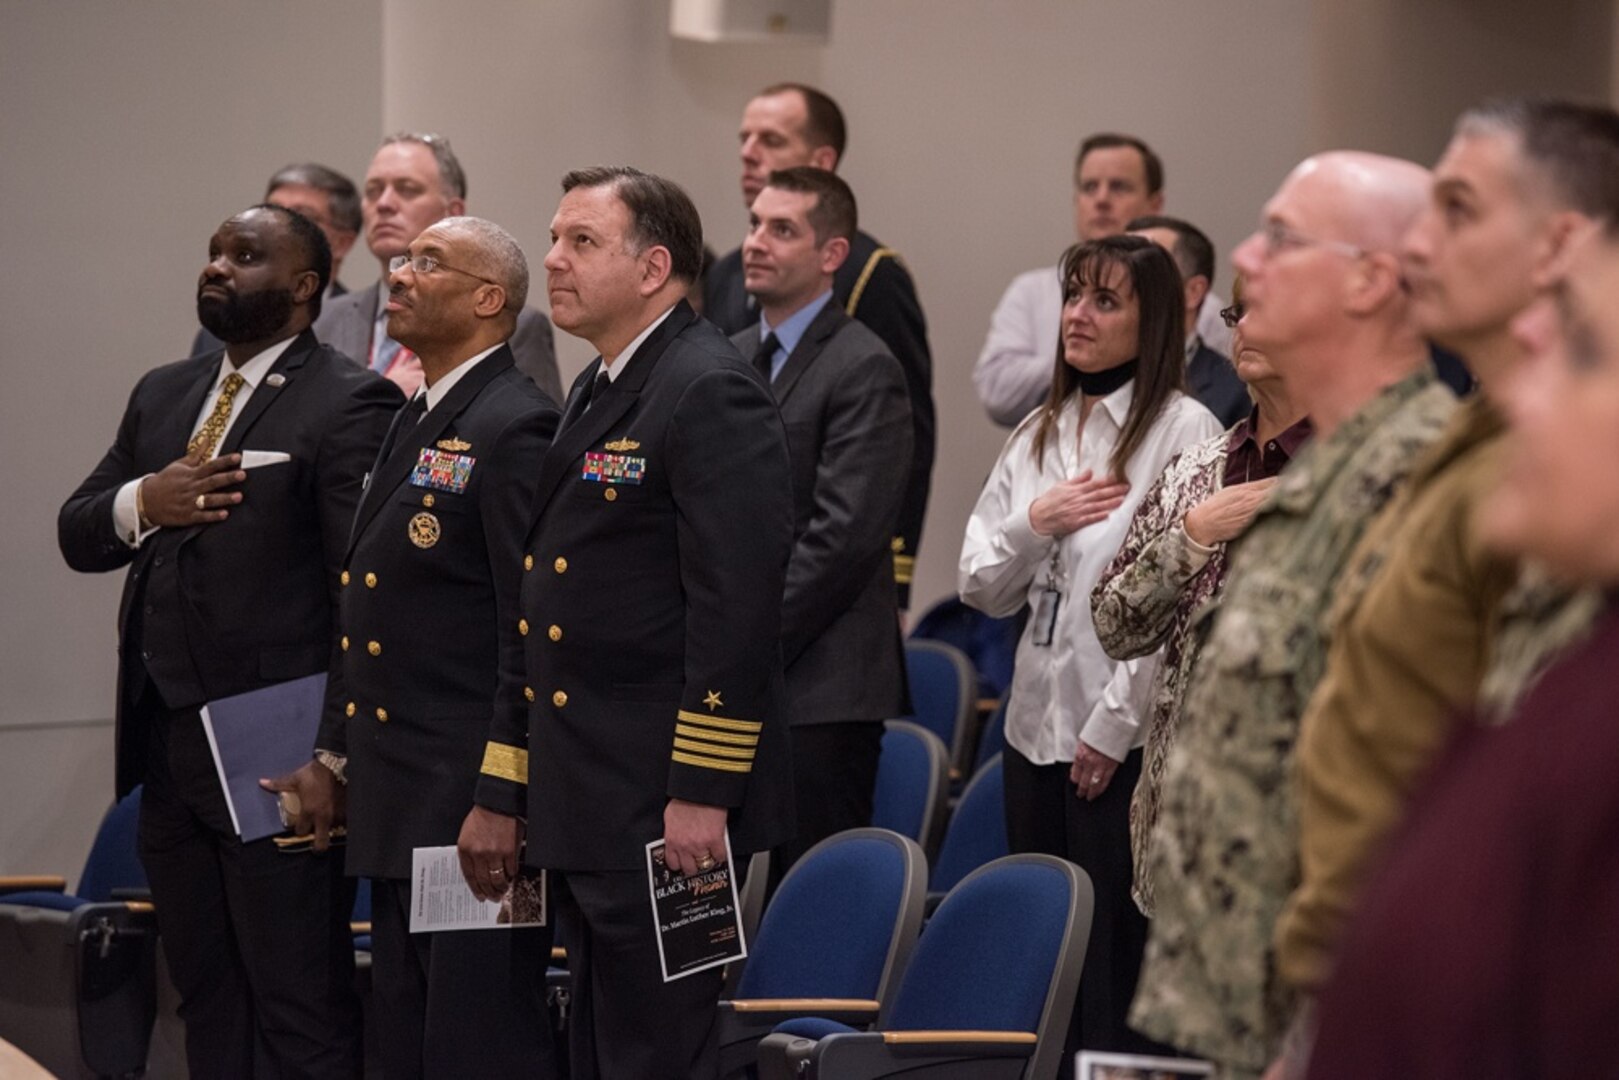 Duane Williams (left), SES, director of operations with the Department of Agriculture; Rear Adm. Jesse Wilson, commander, Naval Surface Force Atlantic; and Capt. Mark Vandroff, commanding officer, Naval Surface Warfare Center, Carderock Division, give honors as the National Anthem is played at the beginning of Carderock's Black History Month celebration Feb. 13, 2018, in West Bethesda, Md.